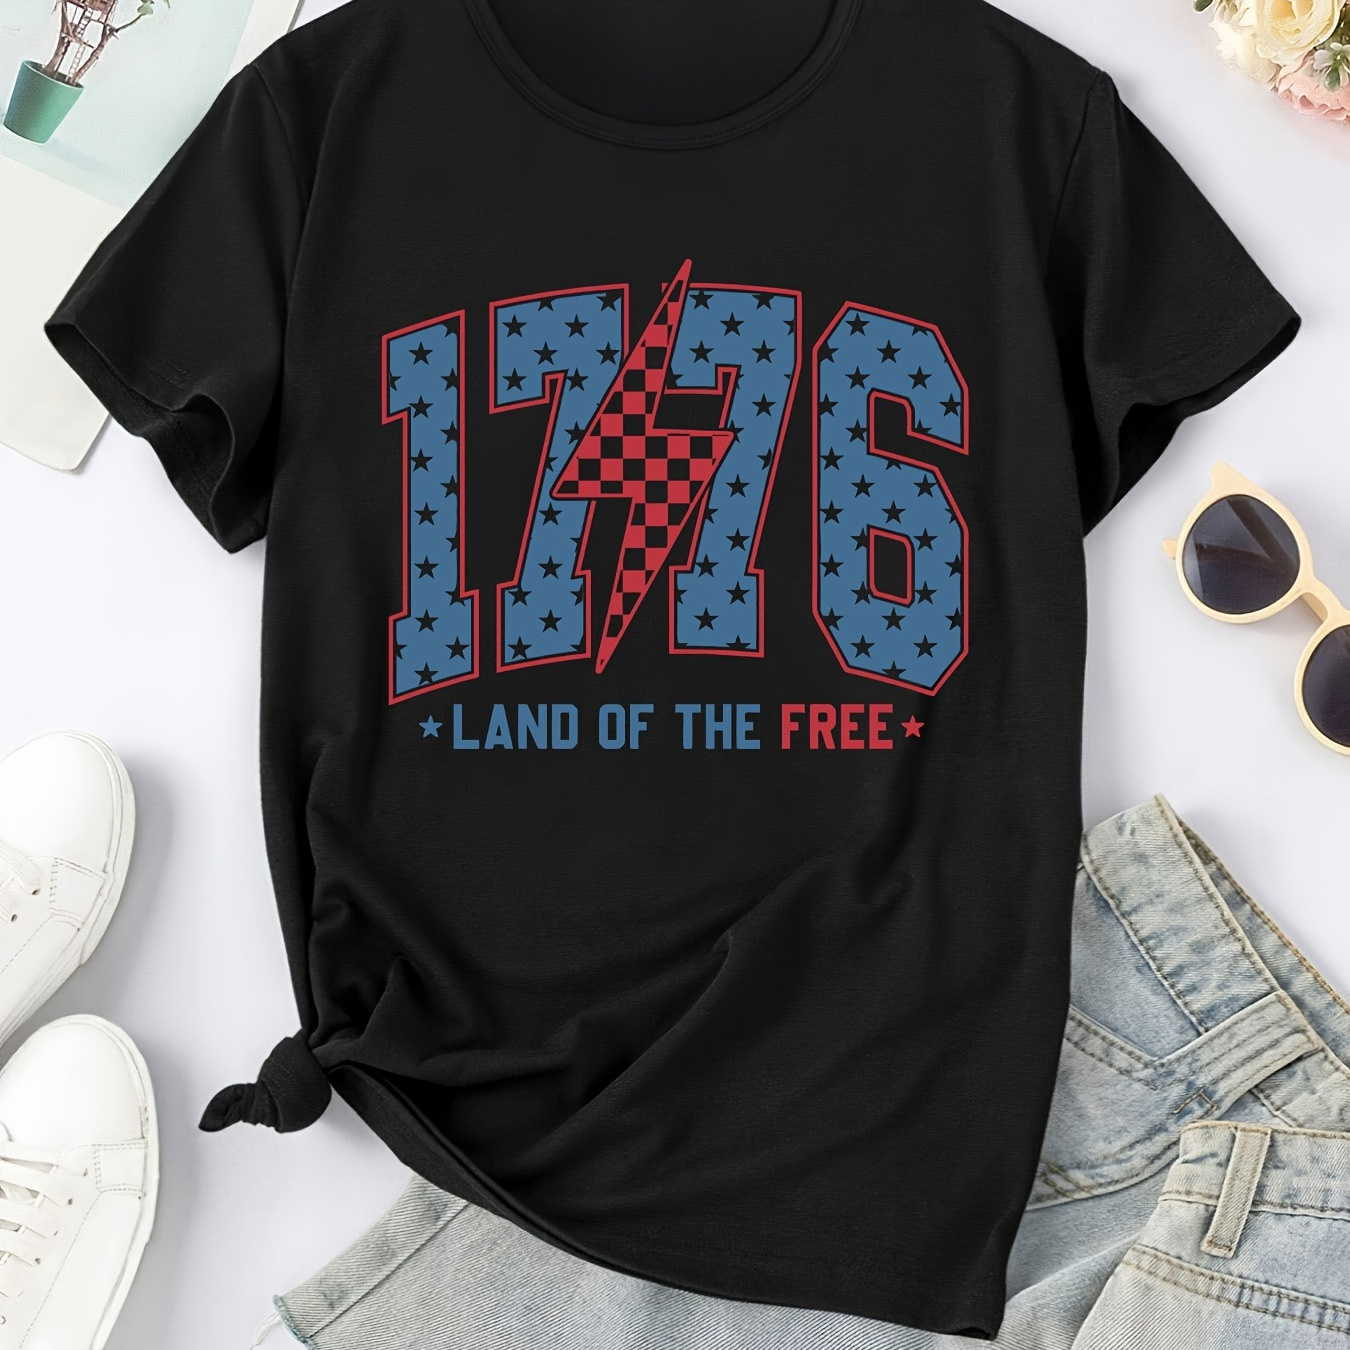 

Independence Day Patriotic T-shirt For Women, '1776 Land Of The Free' Print, Casual Short Sleeve Tee, Sporty Daily Top, Round Neck